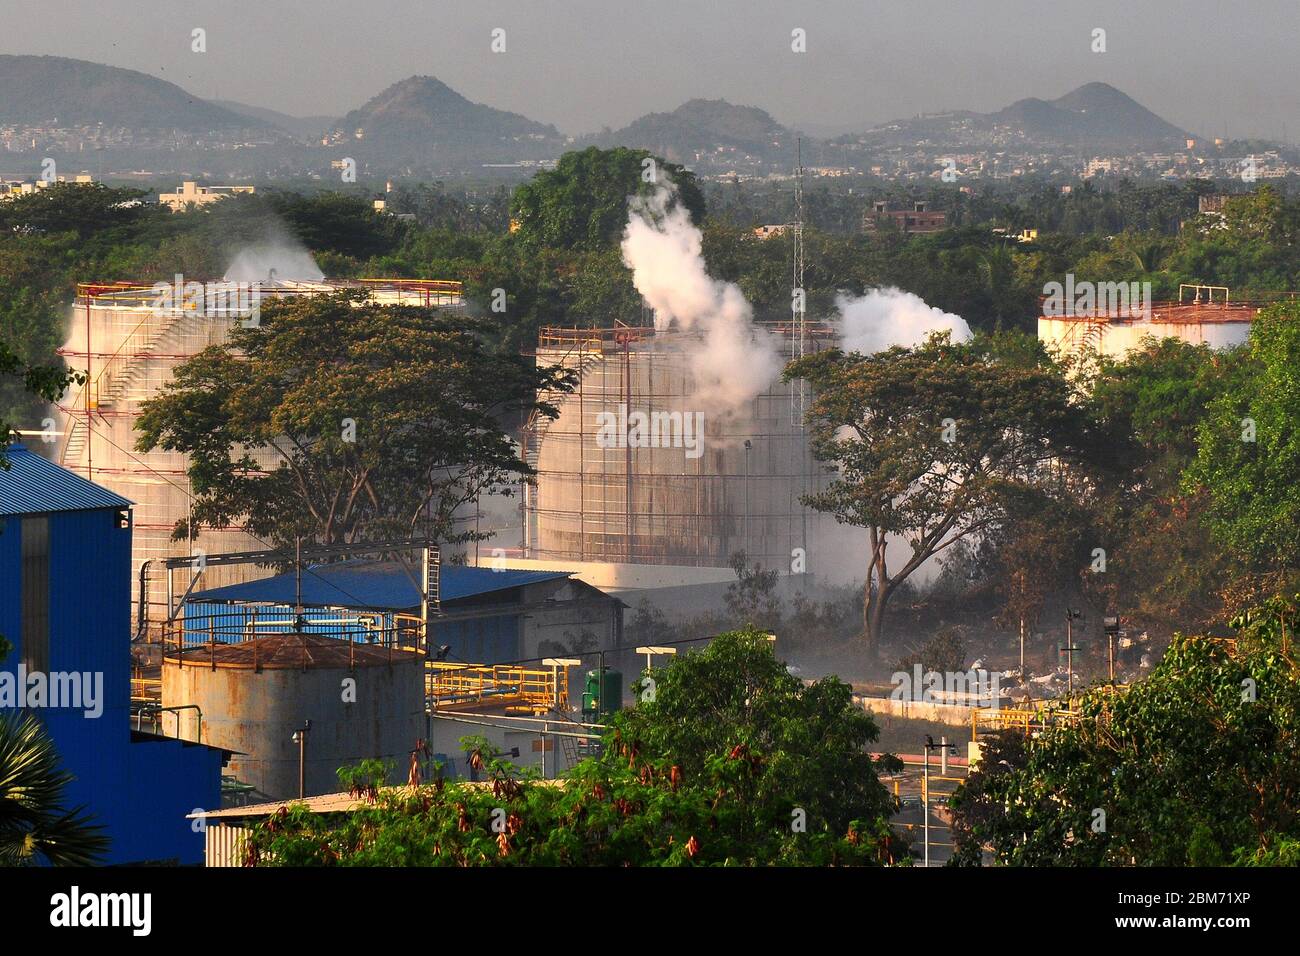 Andhra Pradesh, India. 7th May, 2020. Smoke rises after a gas leakage at the 'LG Polymers' chemical plant in the Vishakhapatnam district of Andhra Pradesh, India, May 7, 2020. The death toll in Thursday's gas leak incident in India's southern state Andhra Pradesh has risen to 11, confirmed Director General of the National Disaster Response Force (NDRF) S.N. Pradhan while addressing media persons in Delhi. Credit: Str/Xinhua/Alamy Live News Stock Photo